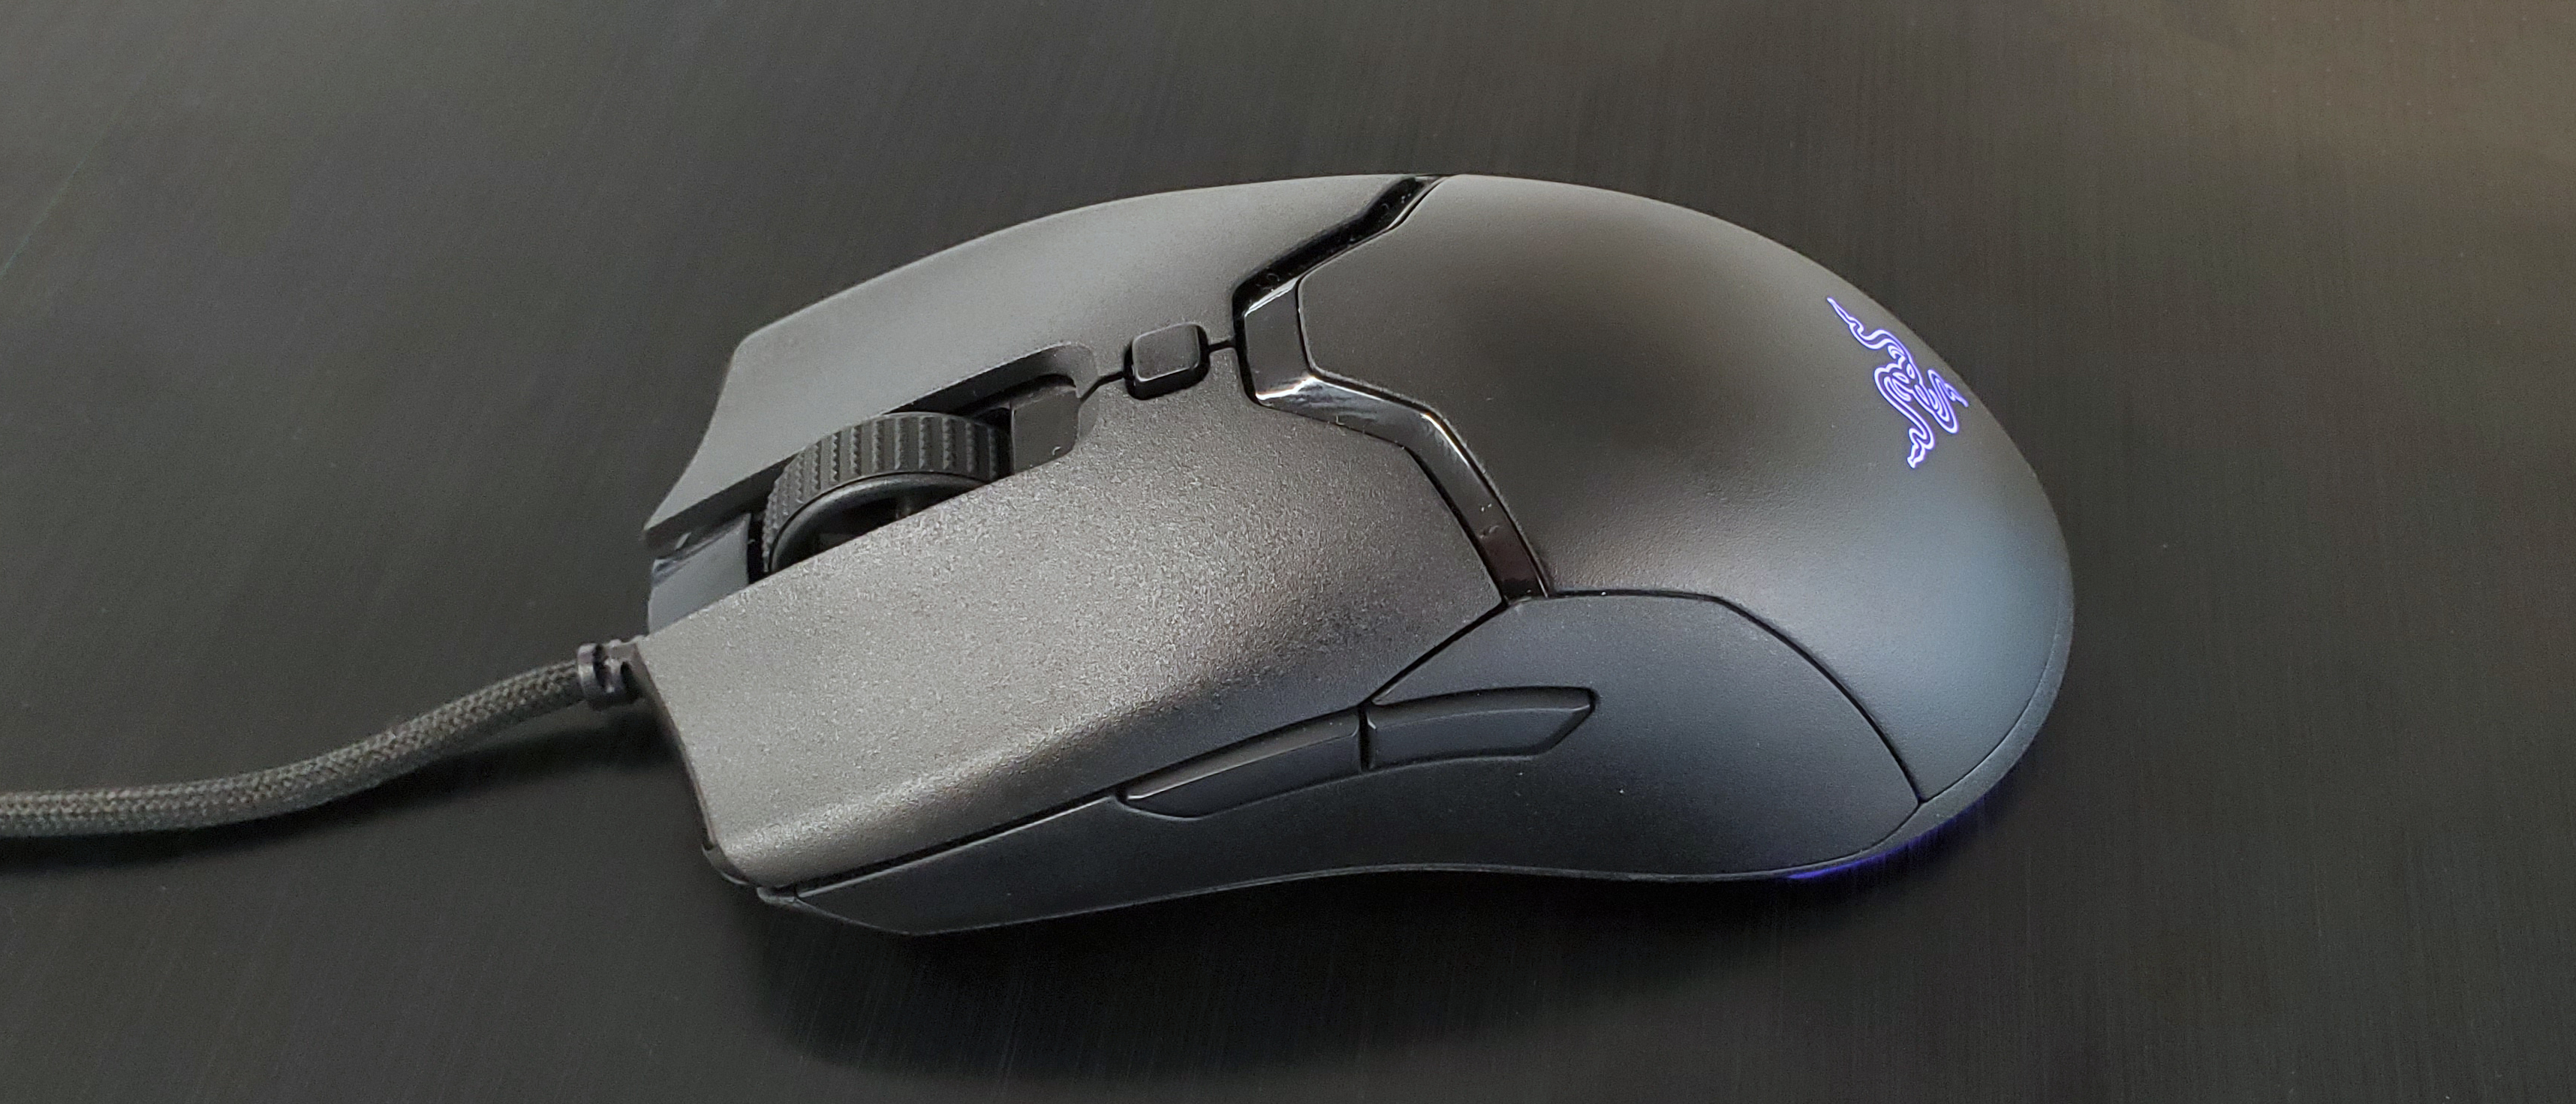 Razer Viper Mini Wired Gaming Mouse Review